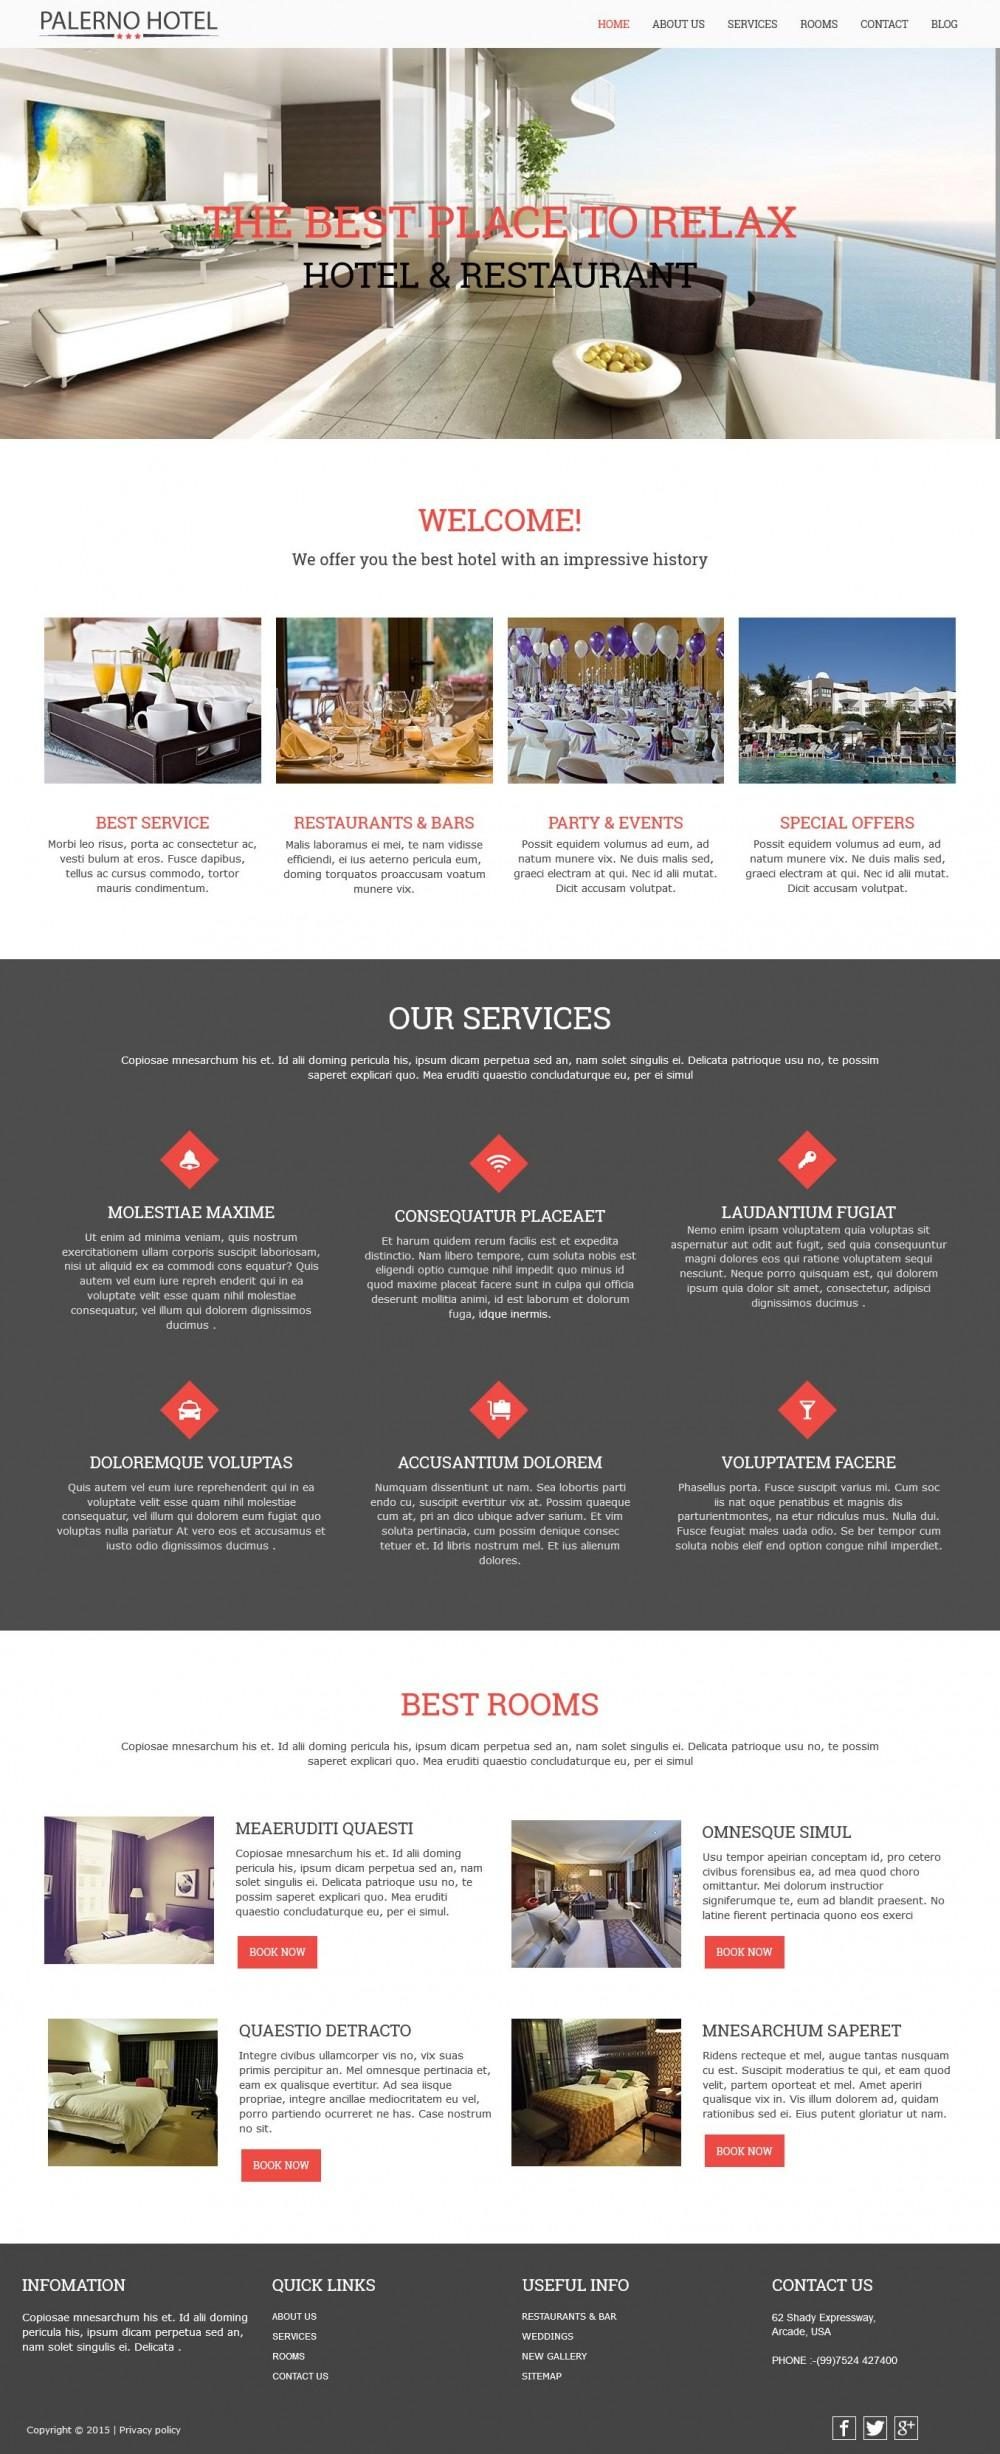 Hotel Palerno - Joomla Template For Hotel Business